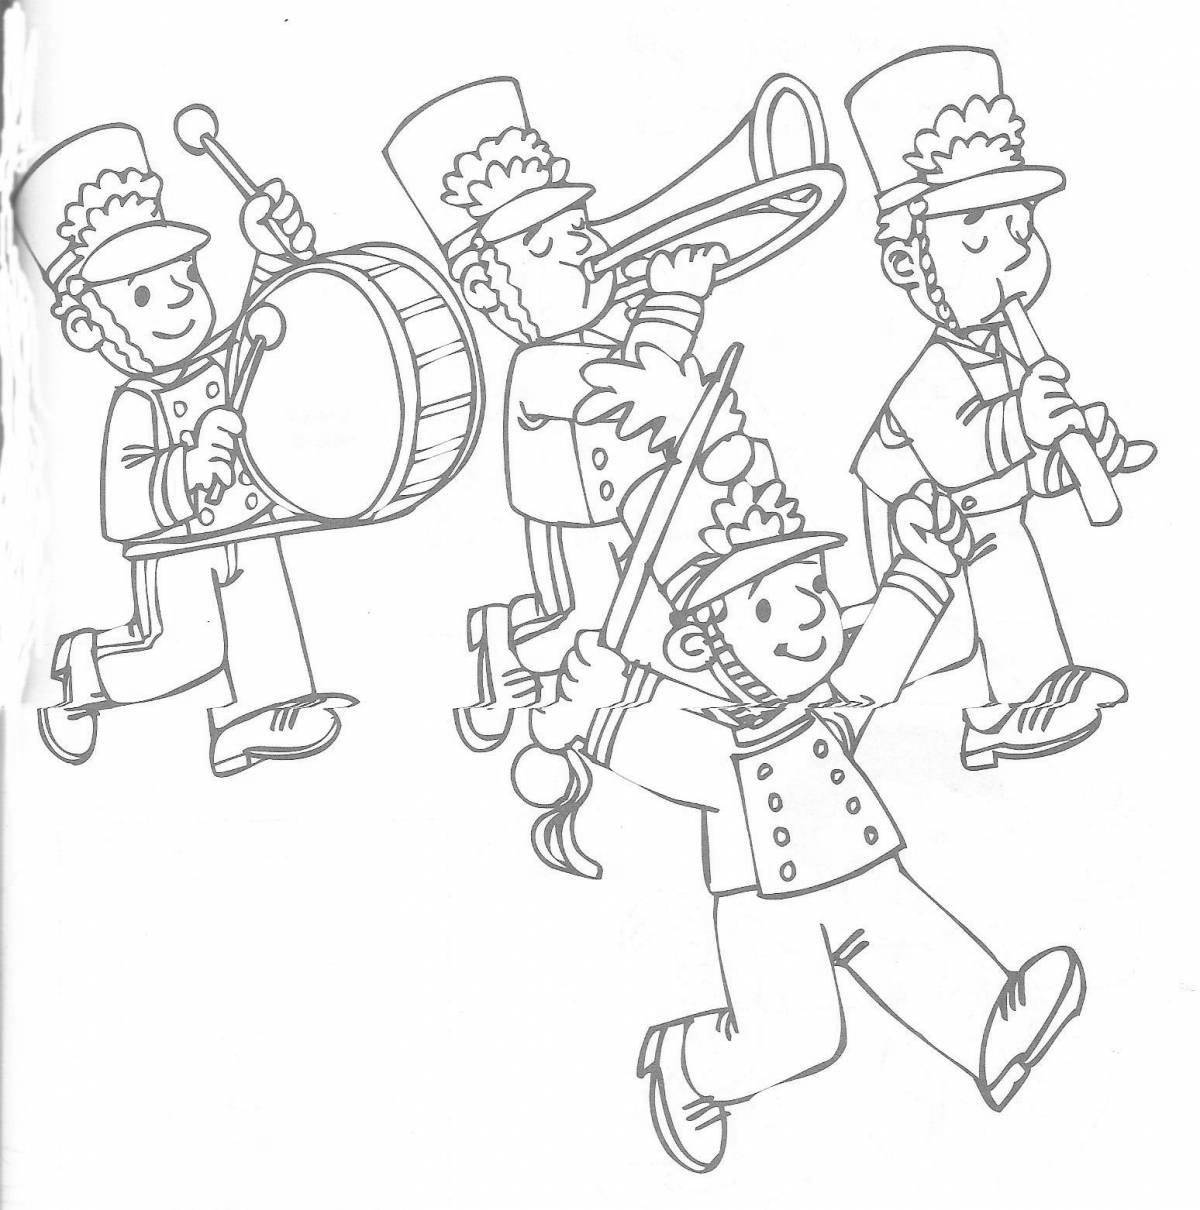 Playful orchestra coloring page for kids